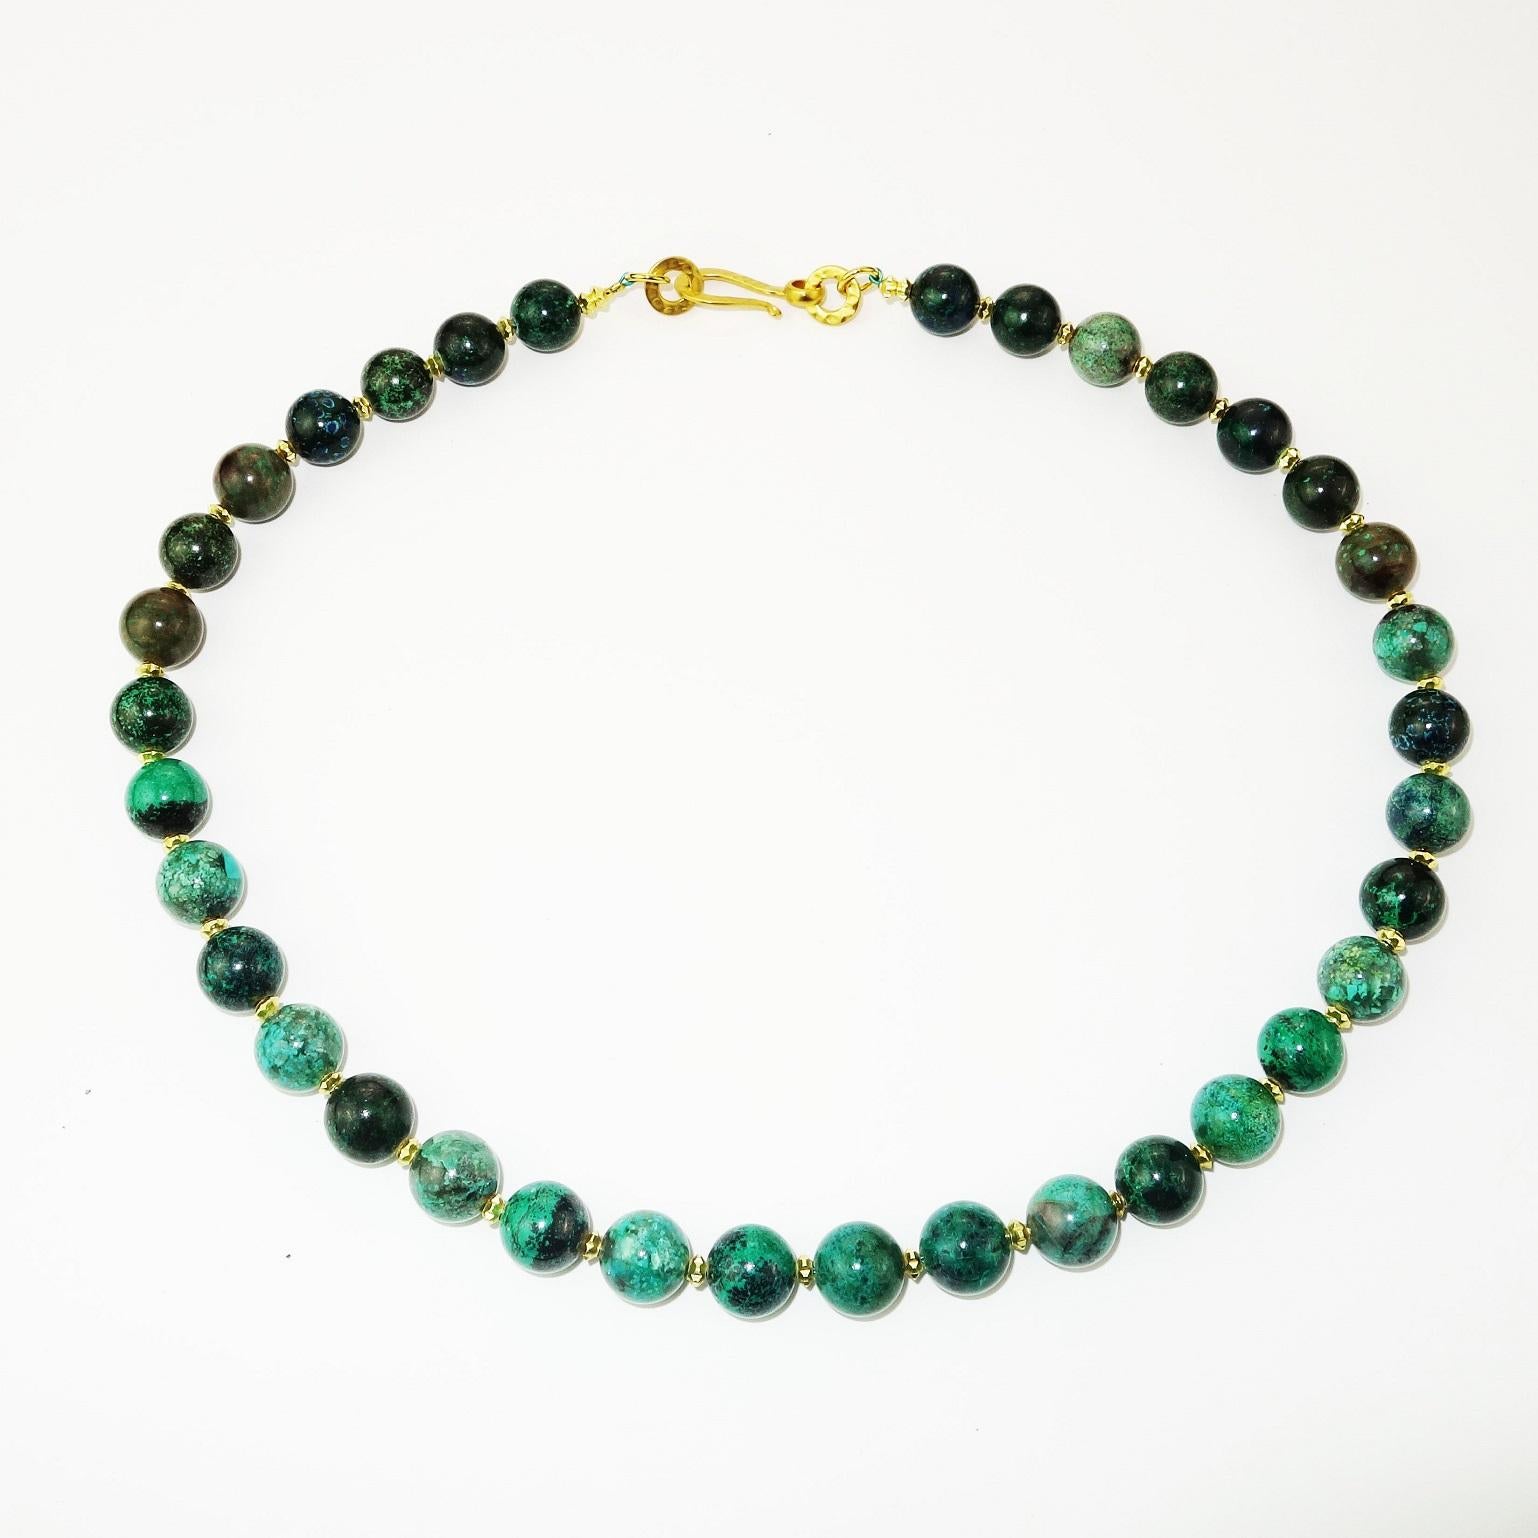 Bead AJD Stunning Green Congolese Chrysocolla Necklace